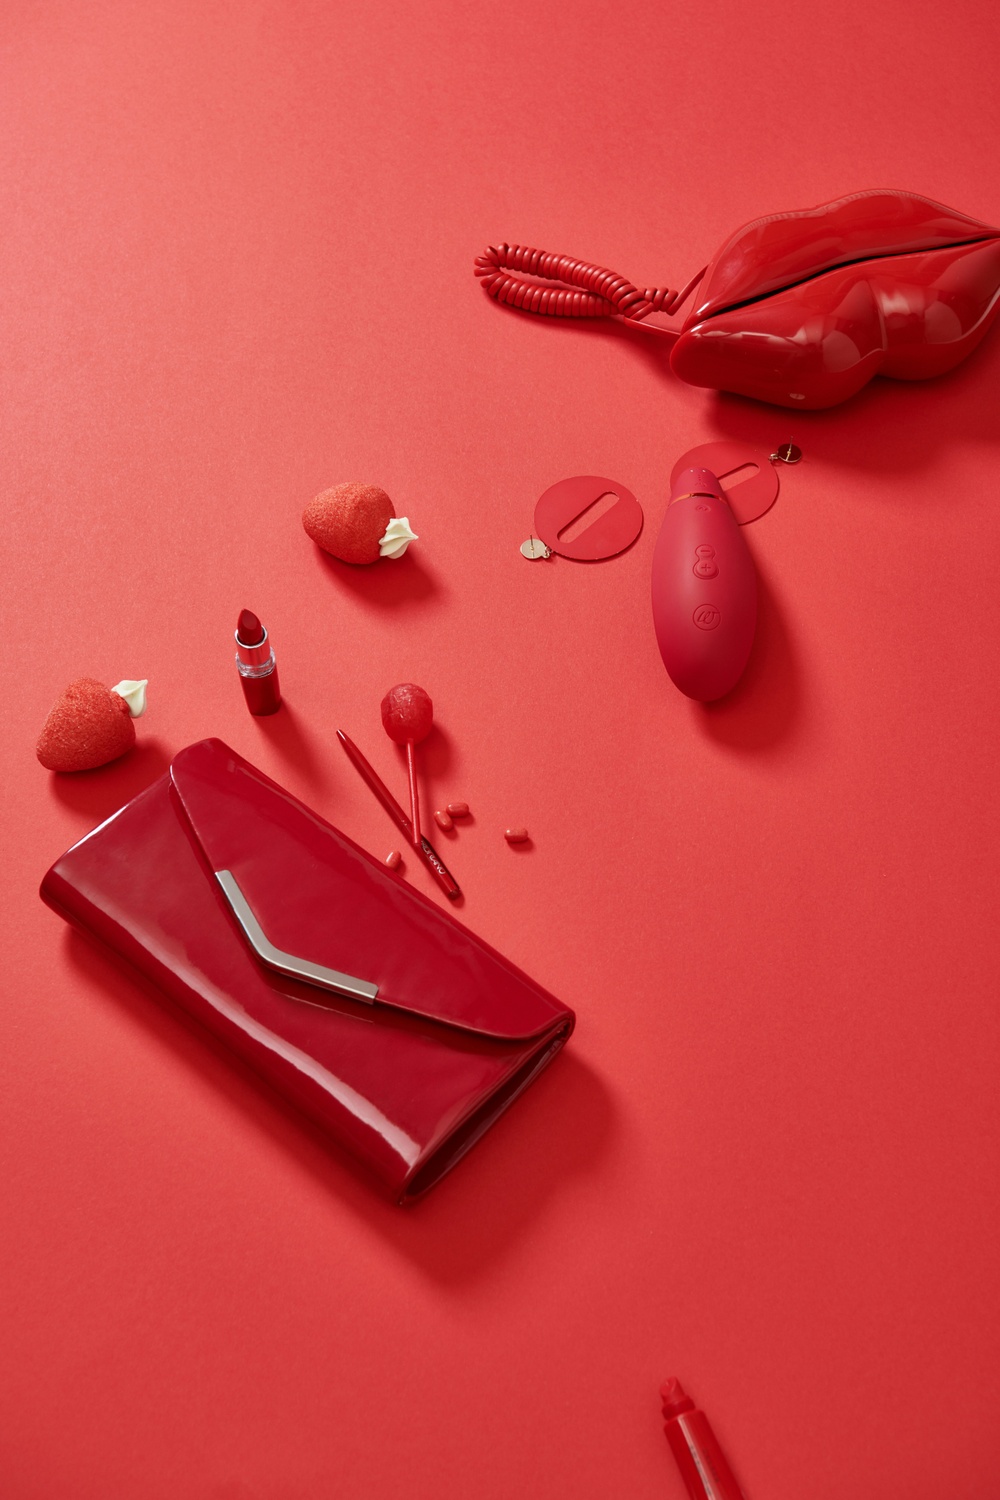 Red gifts and cosmetics on a red background